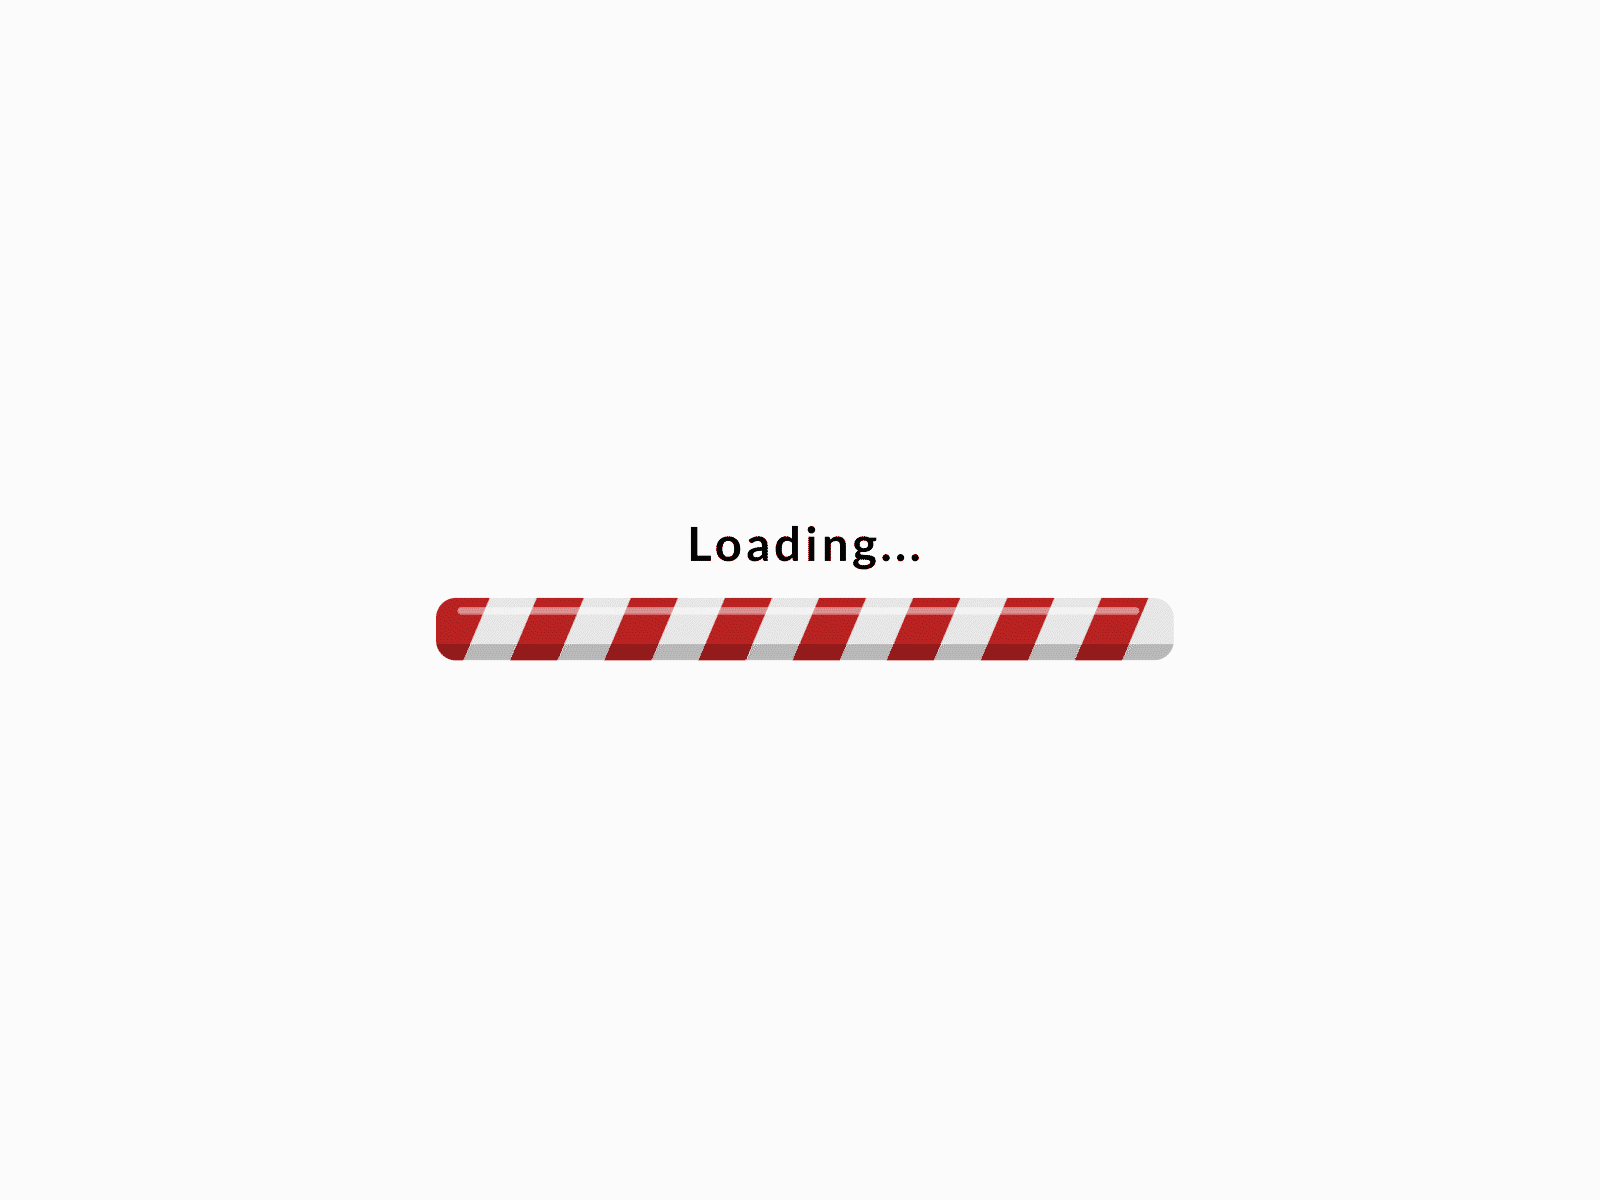 Holiday Loading Gif by Sarah Schoening on Dribbble